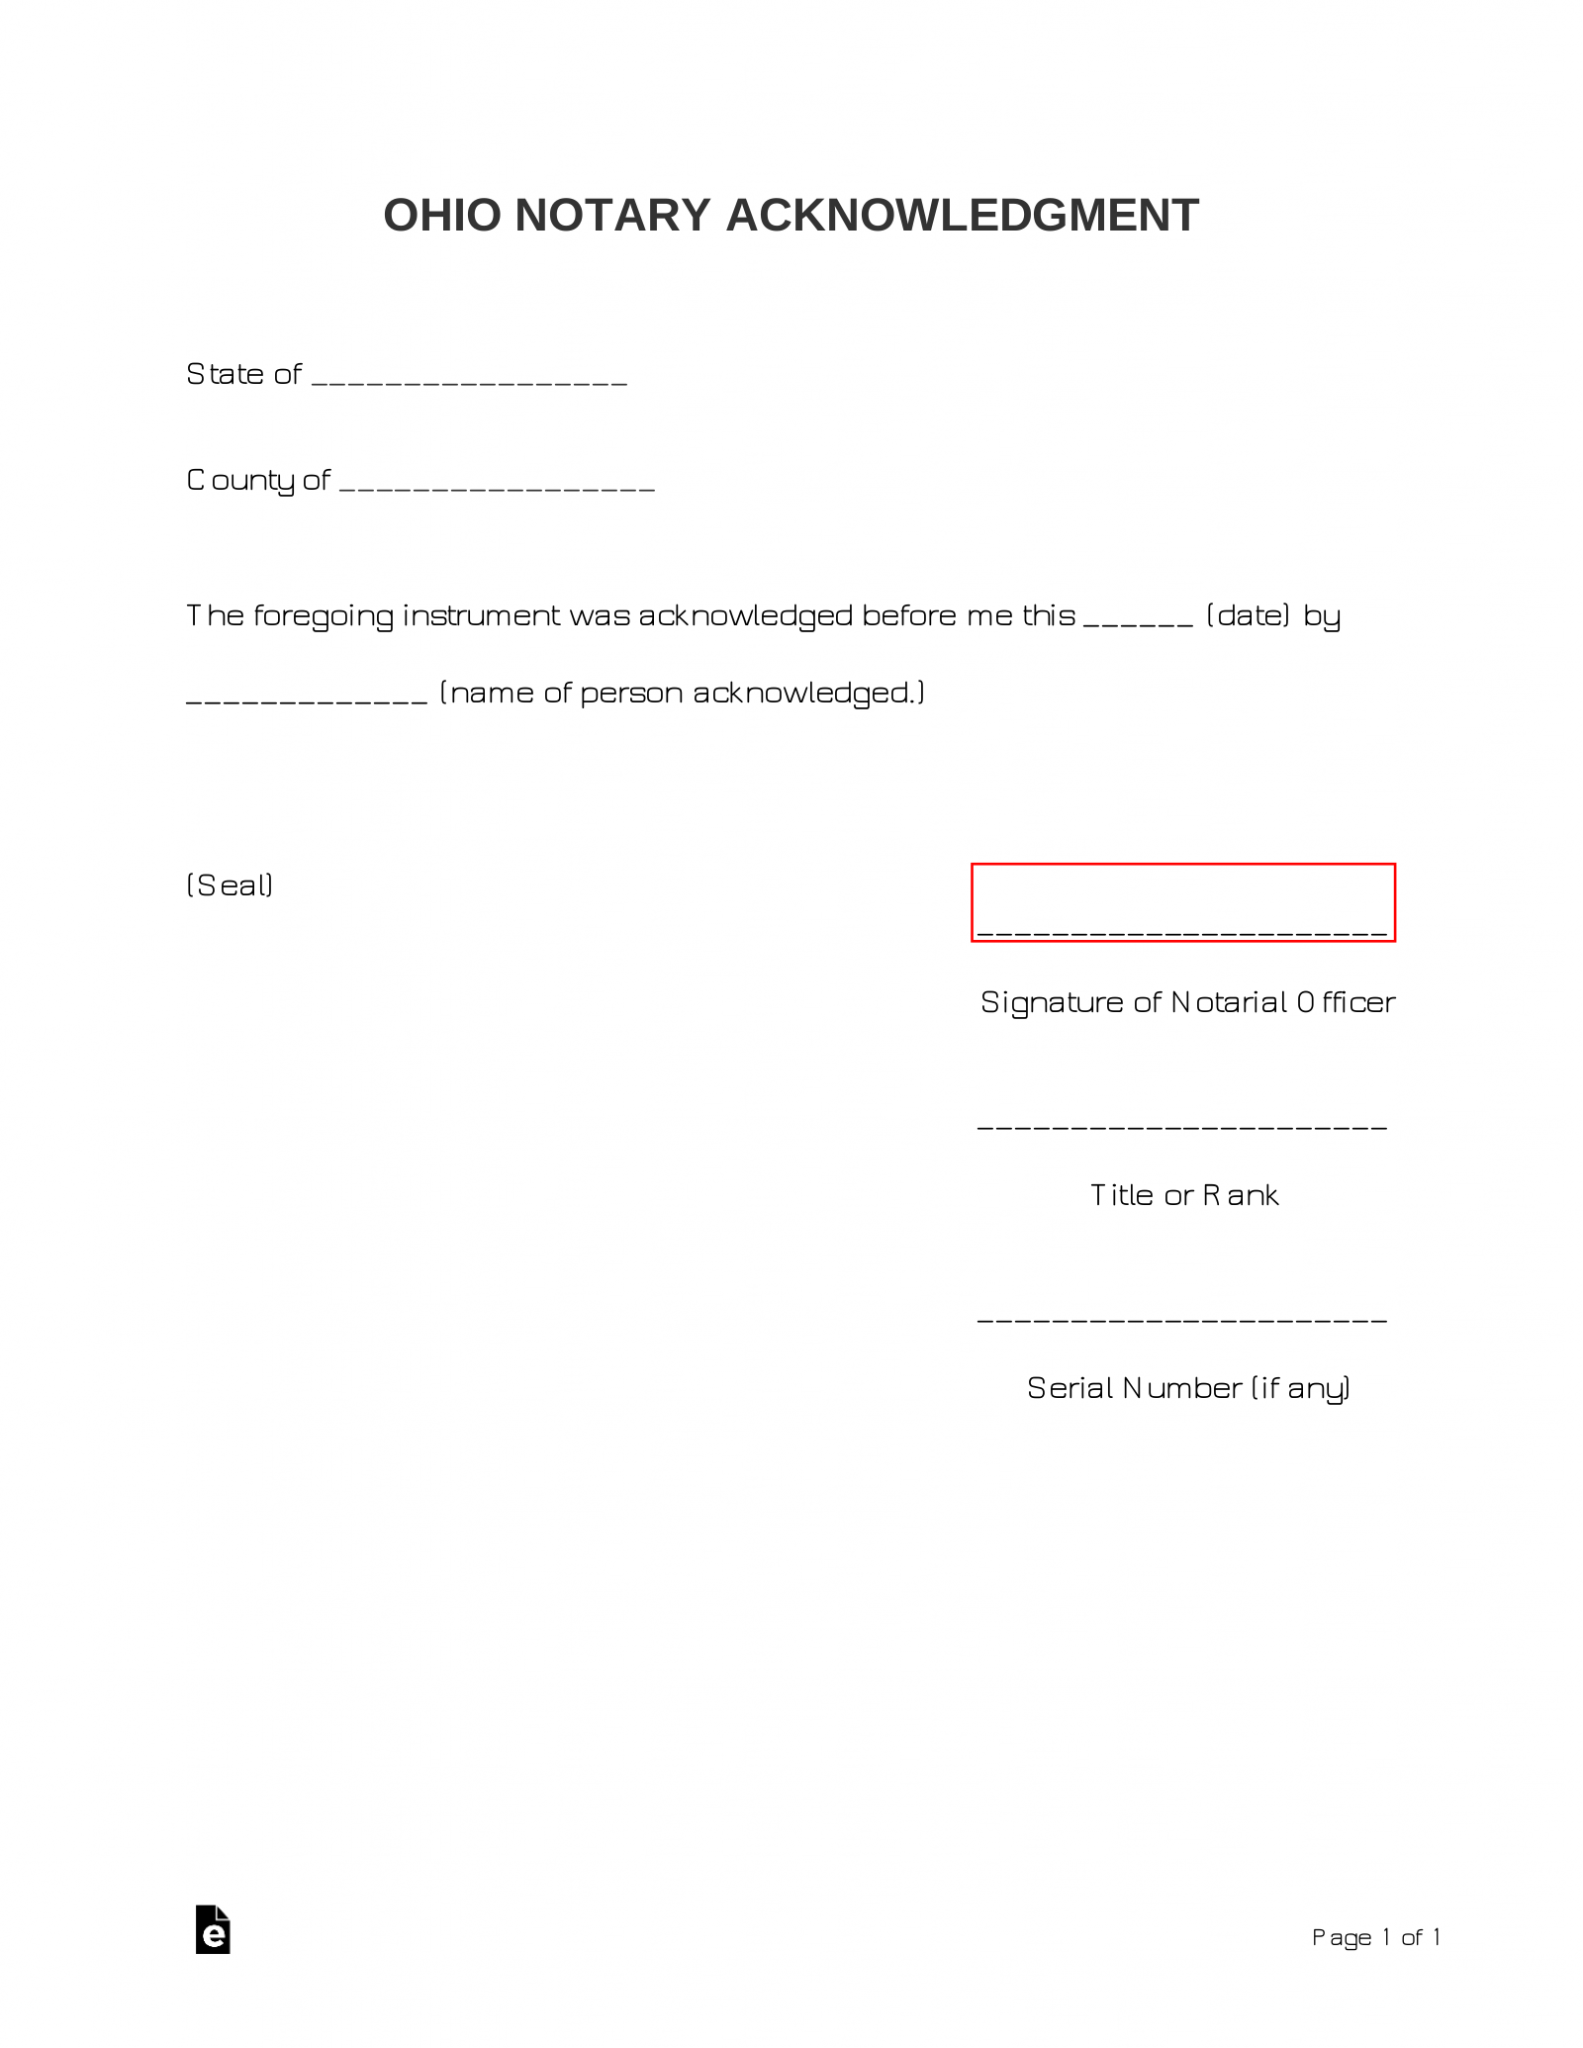 free-ohio-notary-acknowledgment-form-pdf-word-eforms